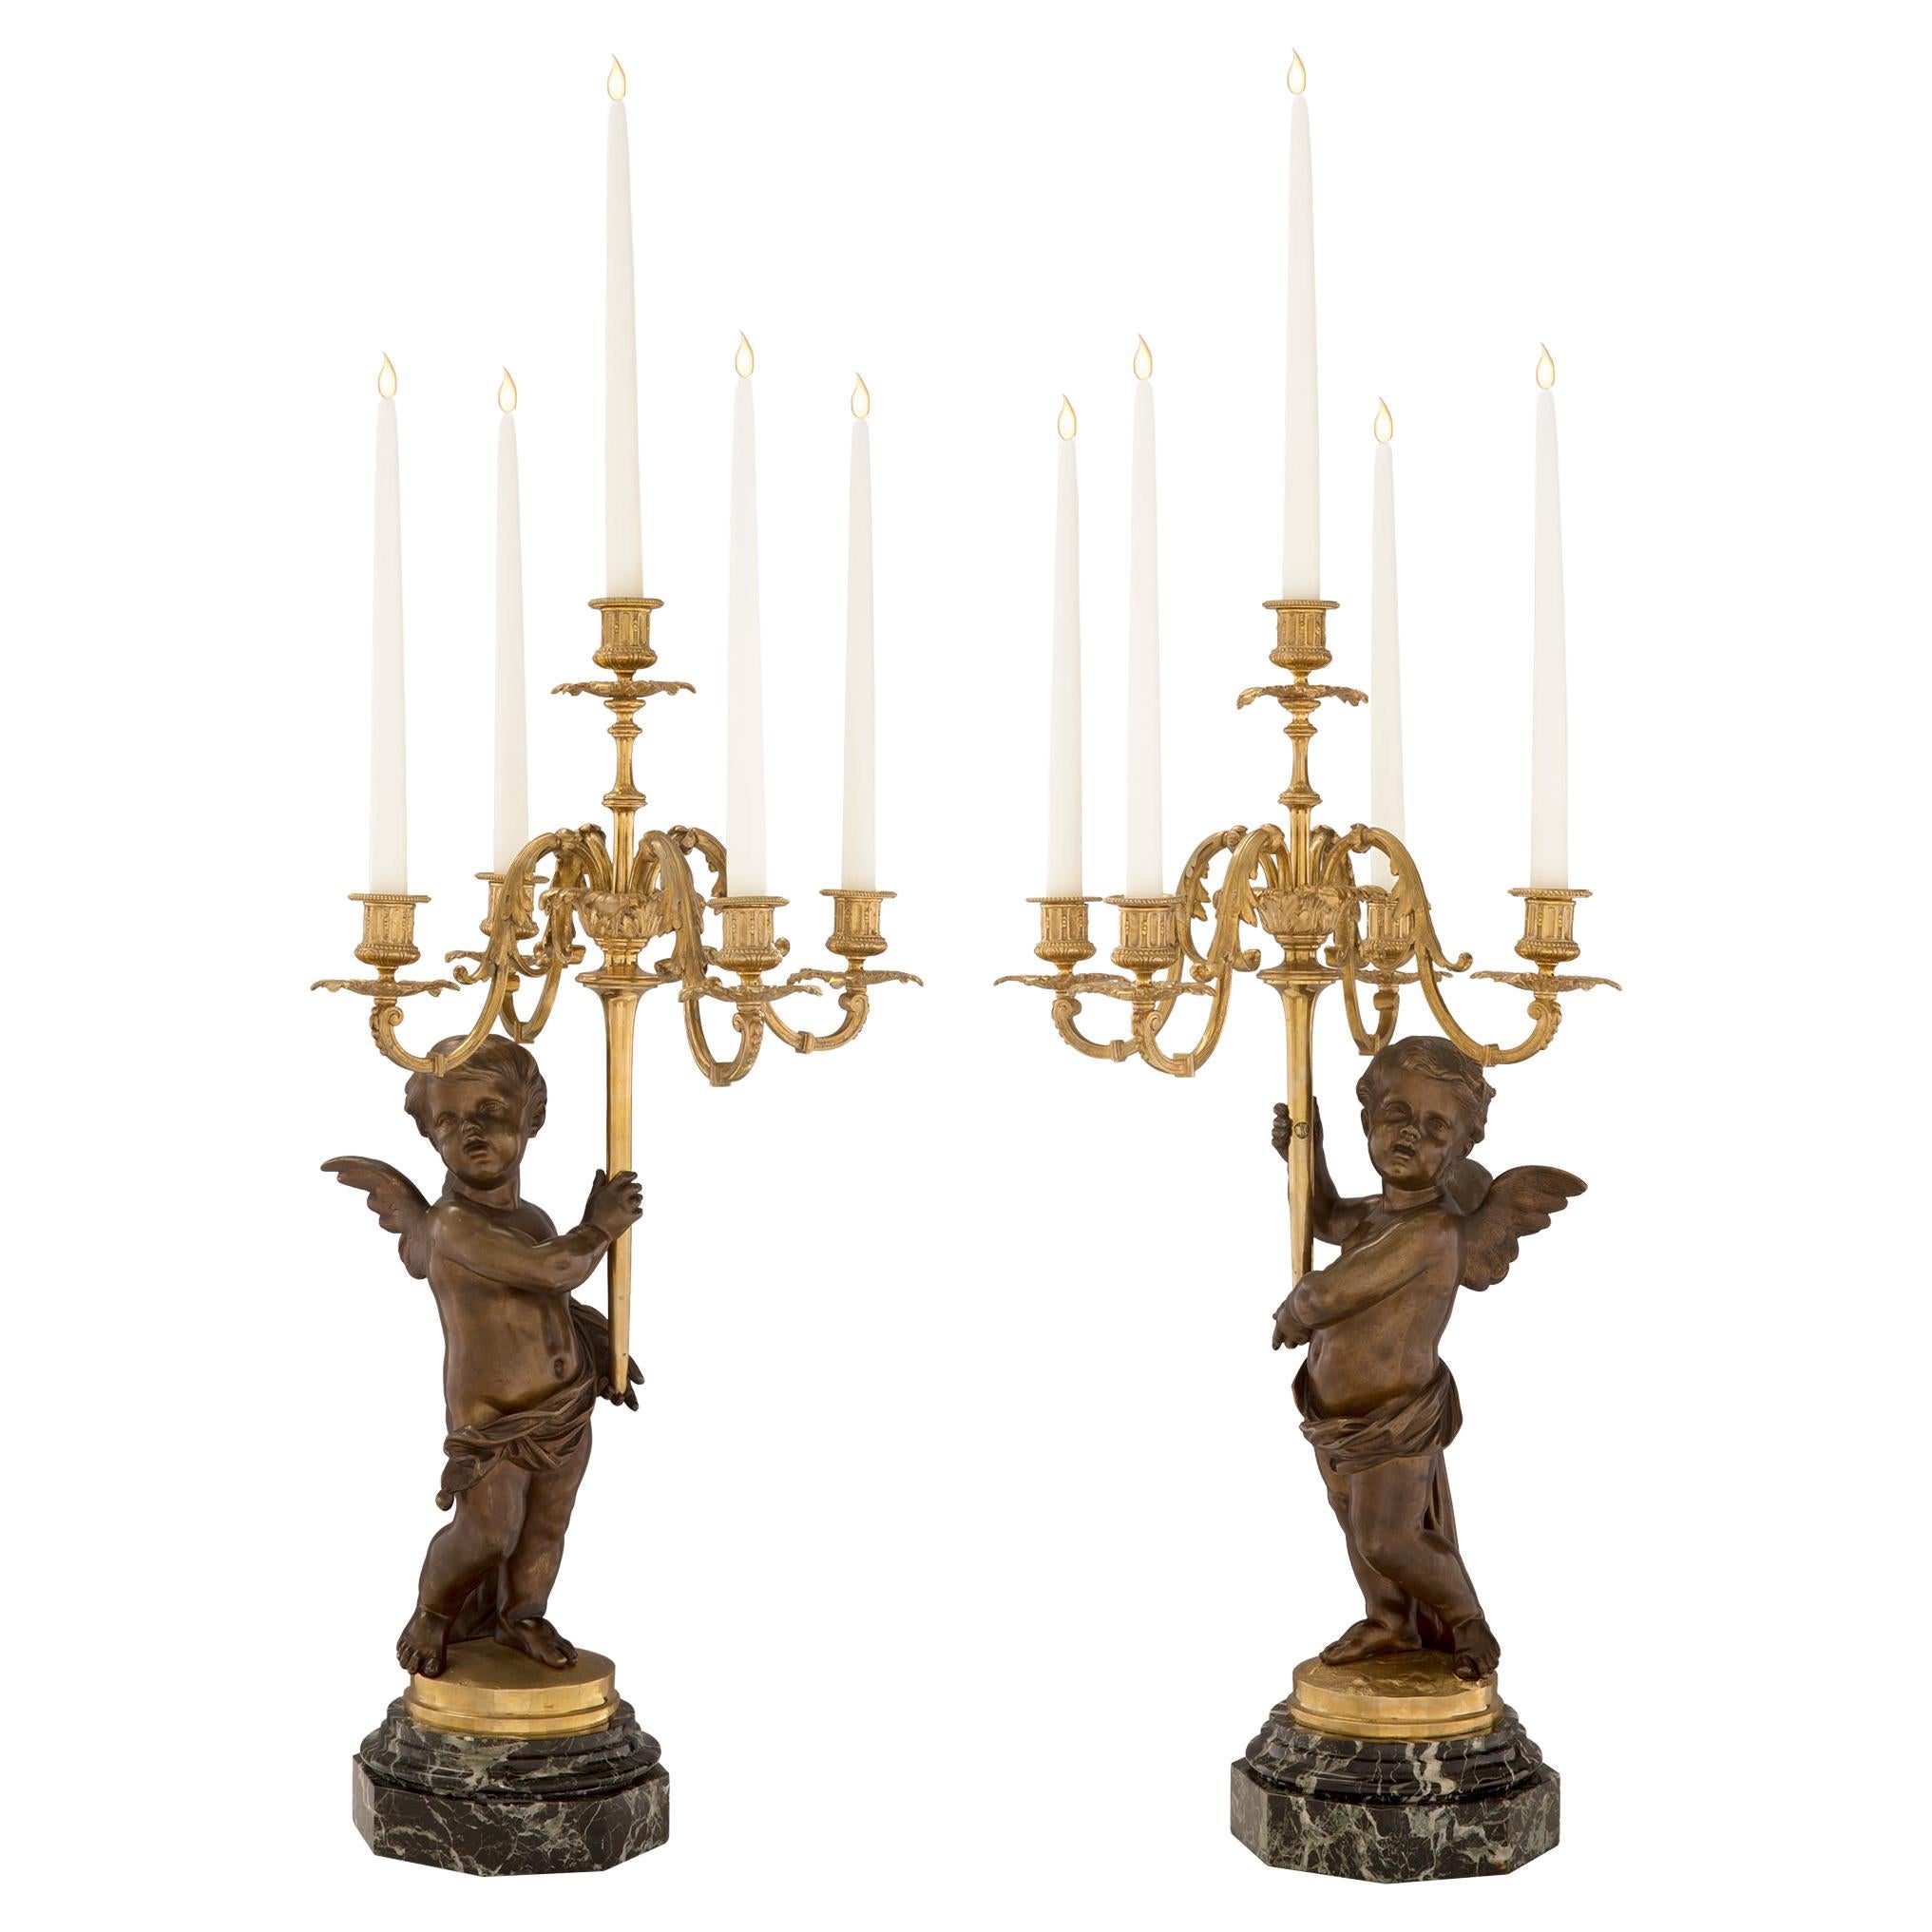 Pair of French 19th Century Louis XVI Style Winged Cherub Candelabras